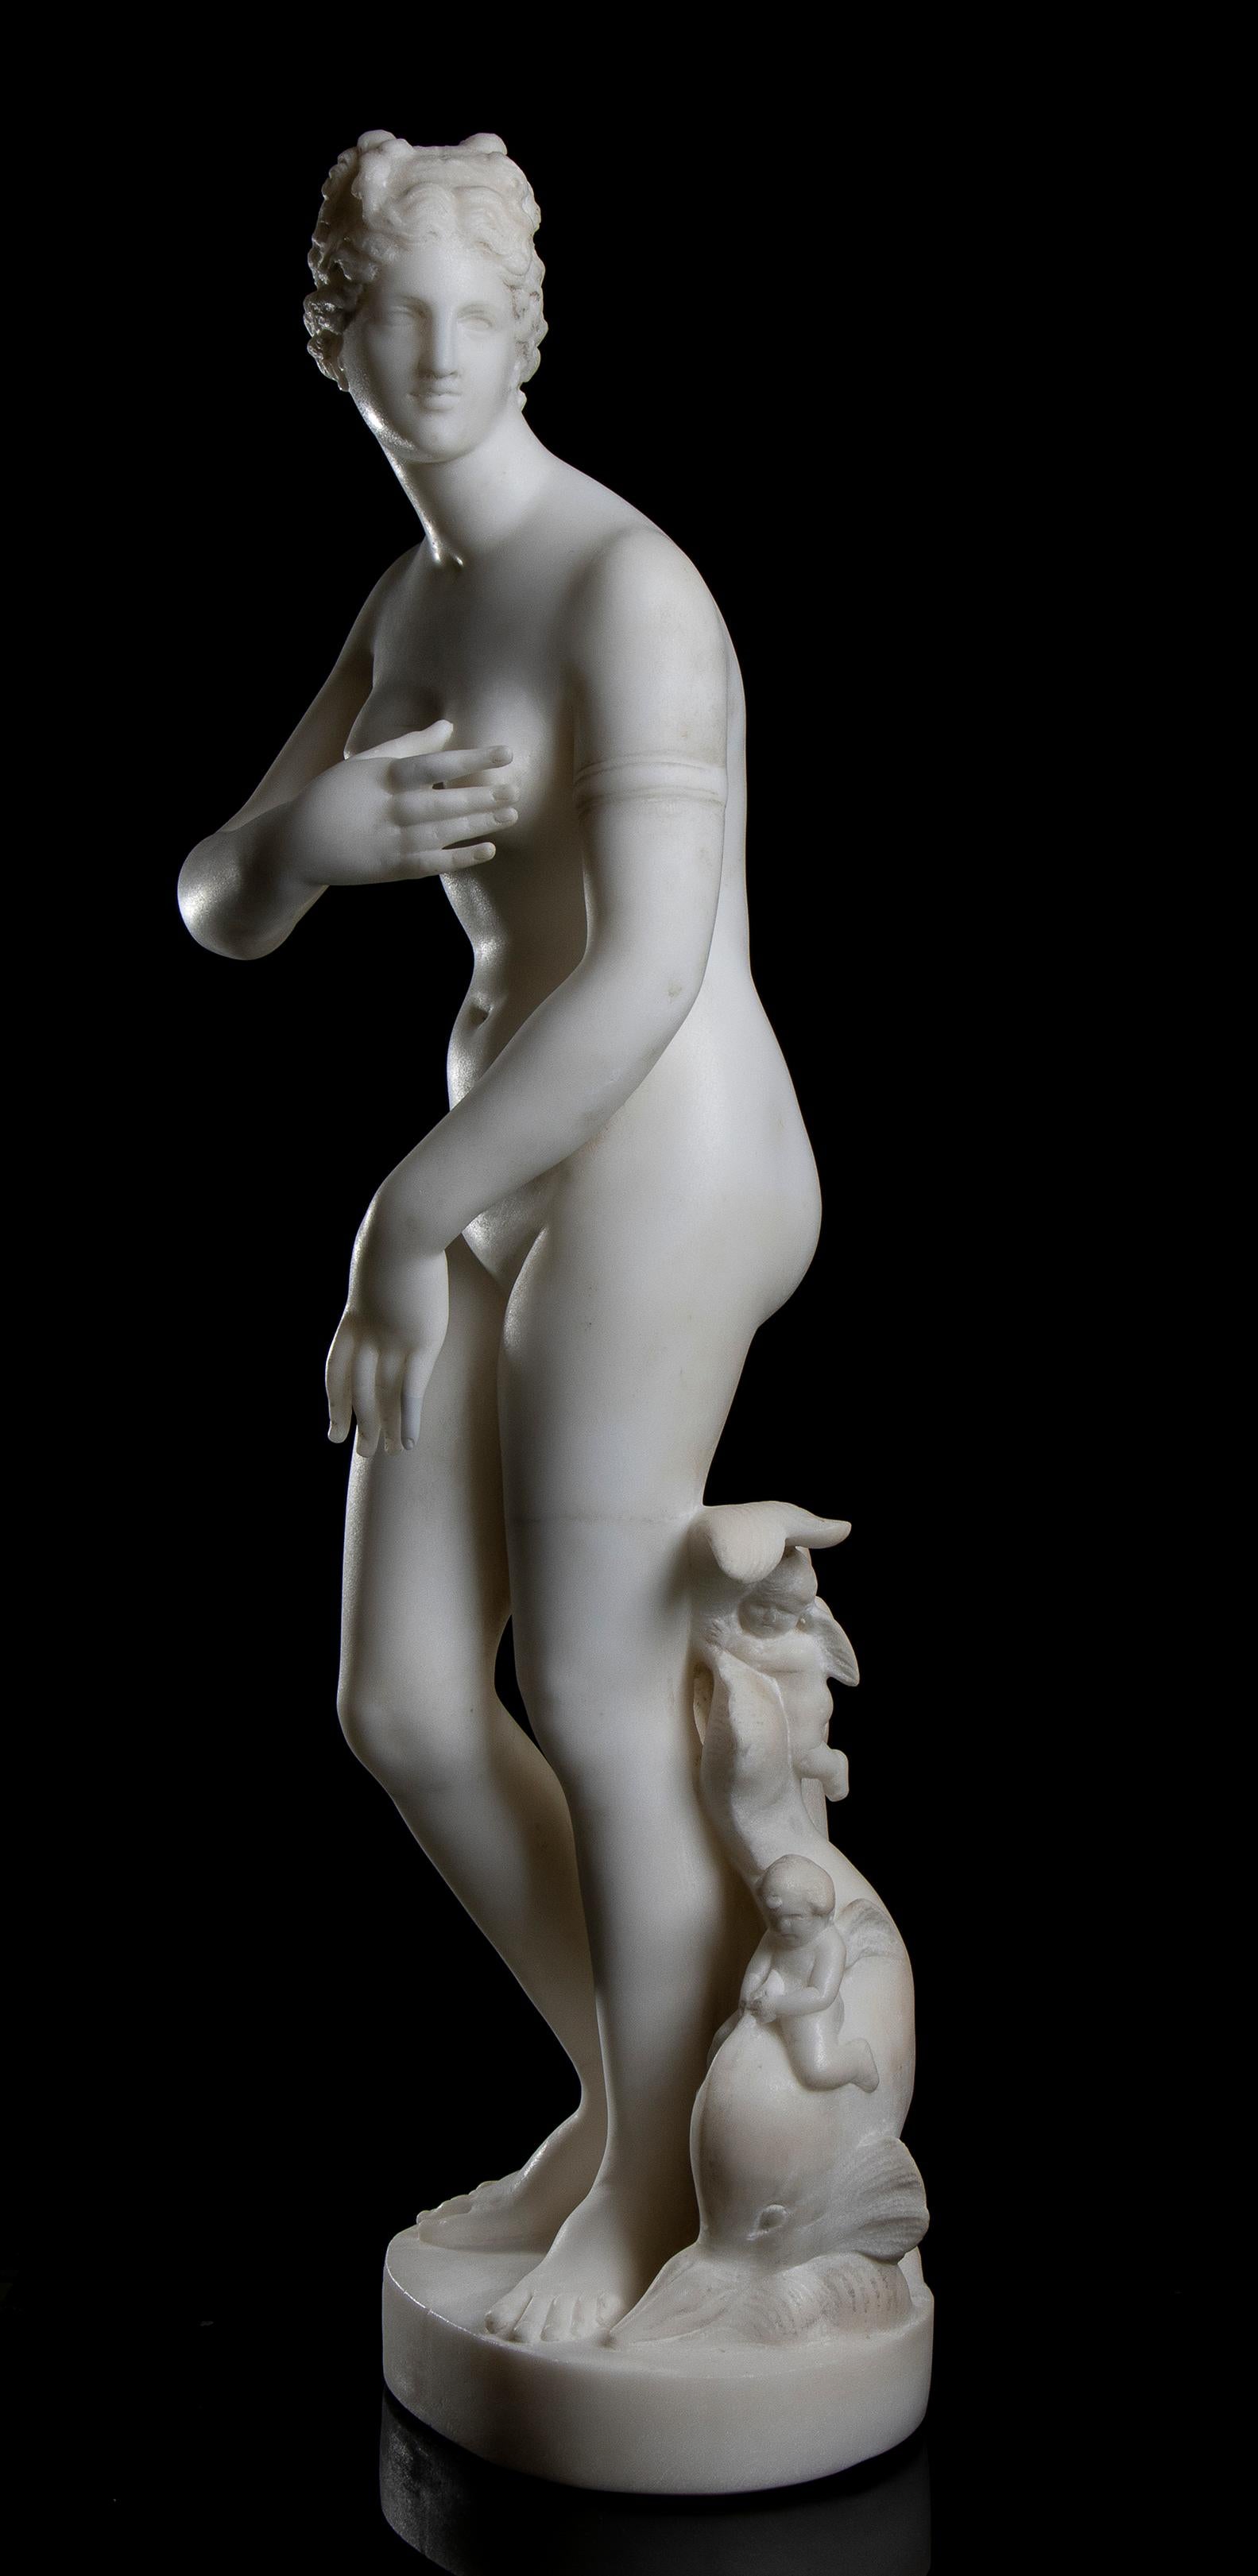 an interesting and beautiful sculpture of Venus, knew as Venus de' Medici, depicts the goddess in a fugitive, momentary pose, as if surprised in the act of emerging from the sea, to which the dolphin at her feet alludes.Carved in the 19th century in